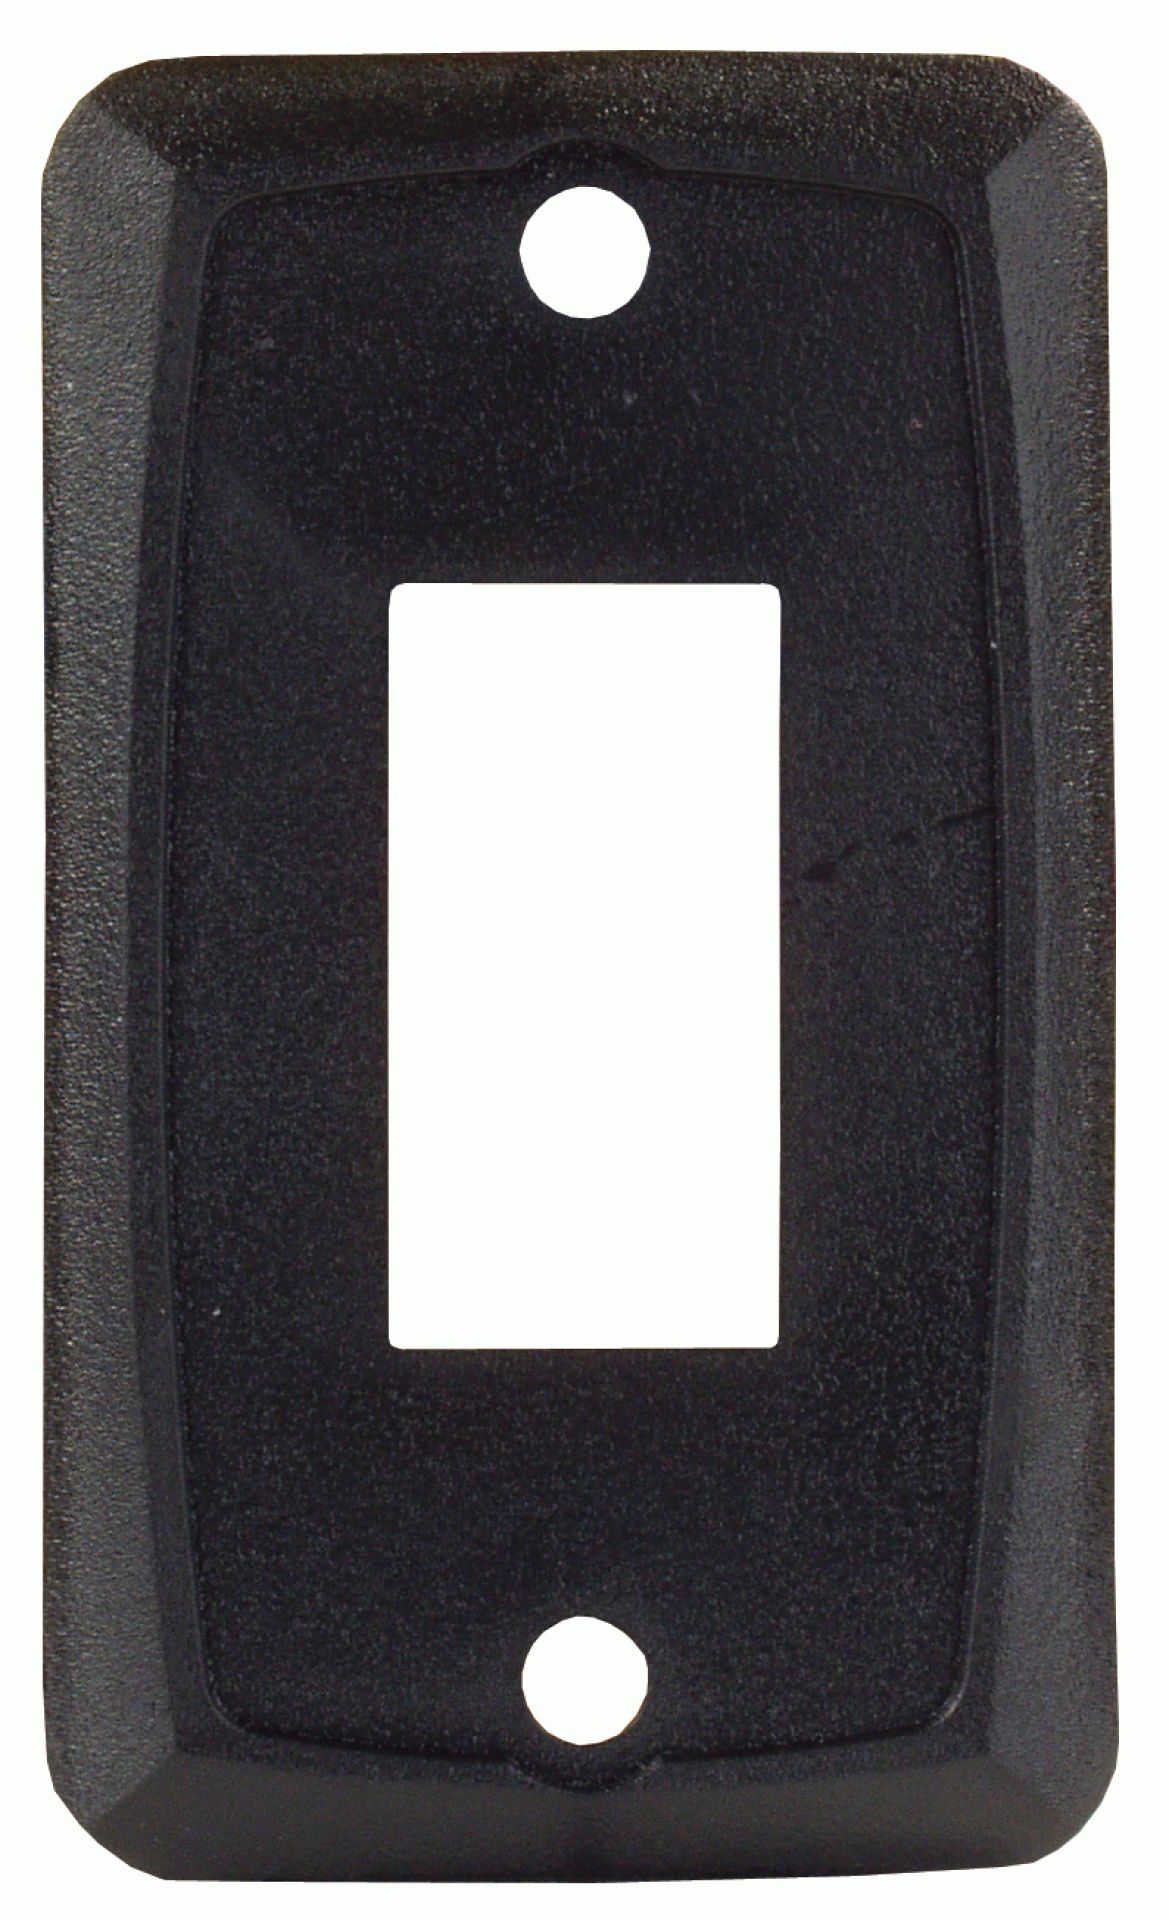 J R PRODUCTS | 12851-5 | SWITCH PLATE - SINGLE BLACK (5pk)